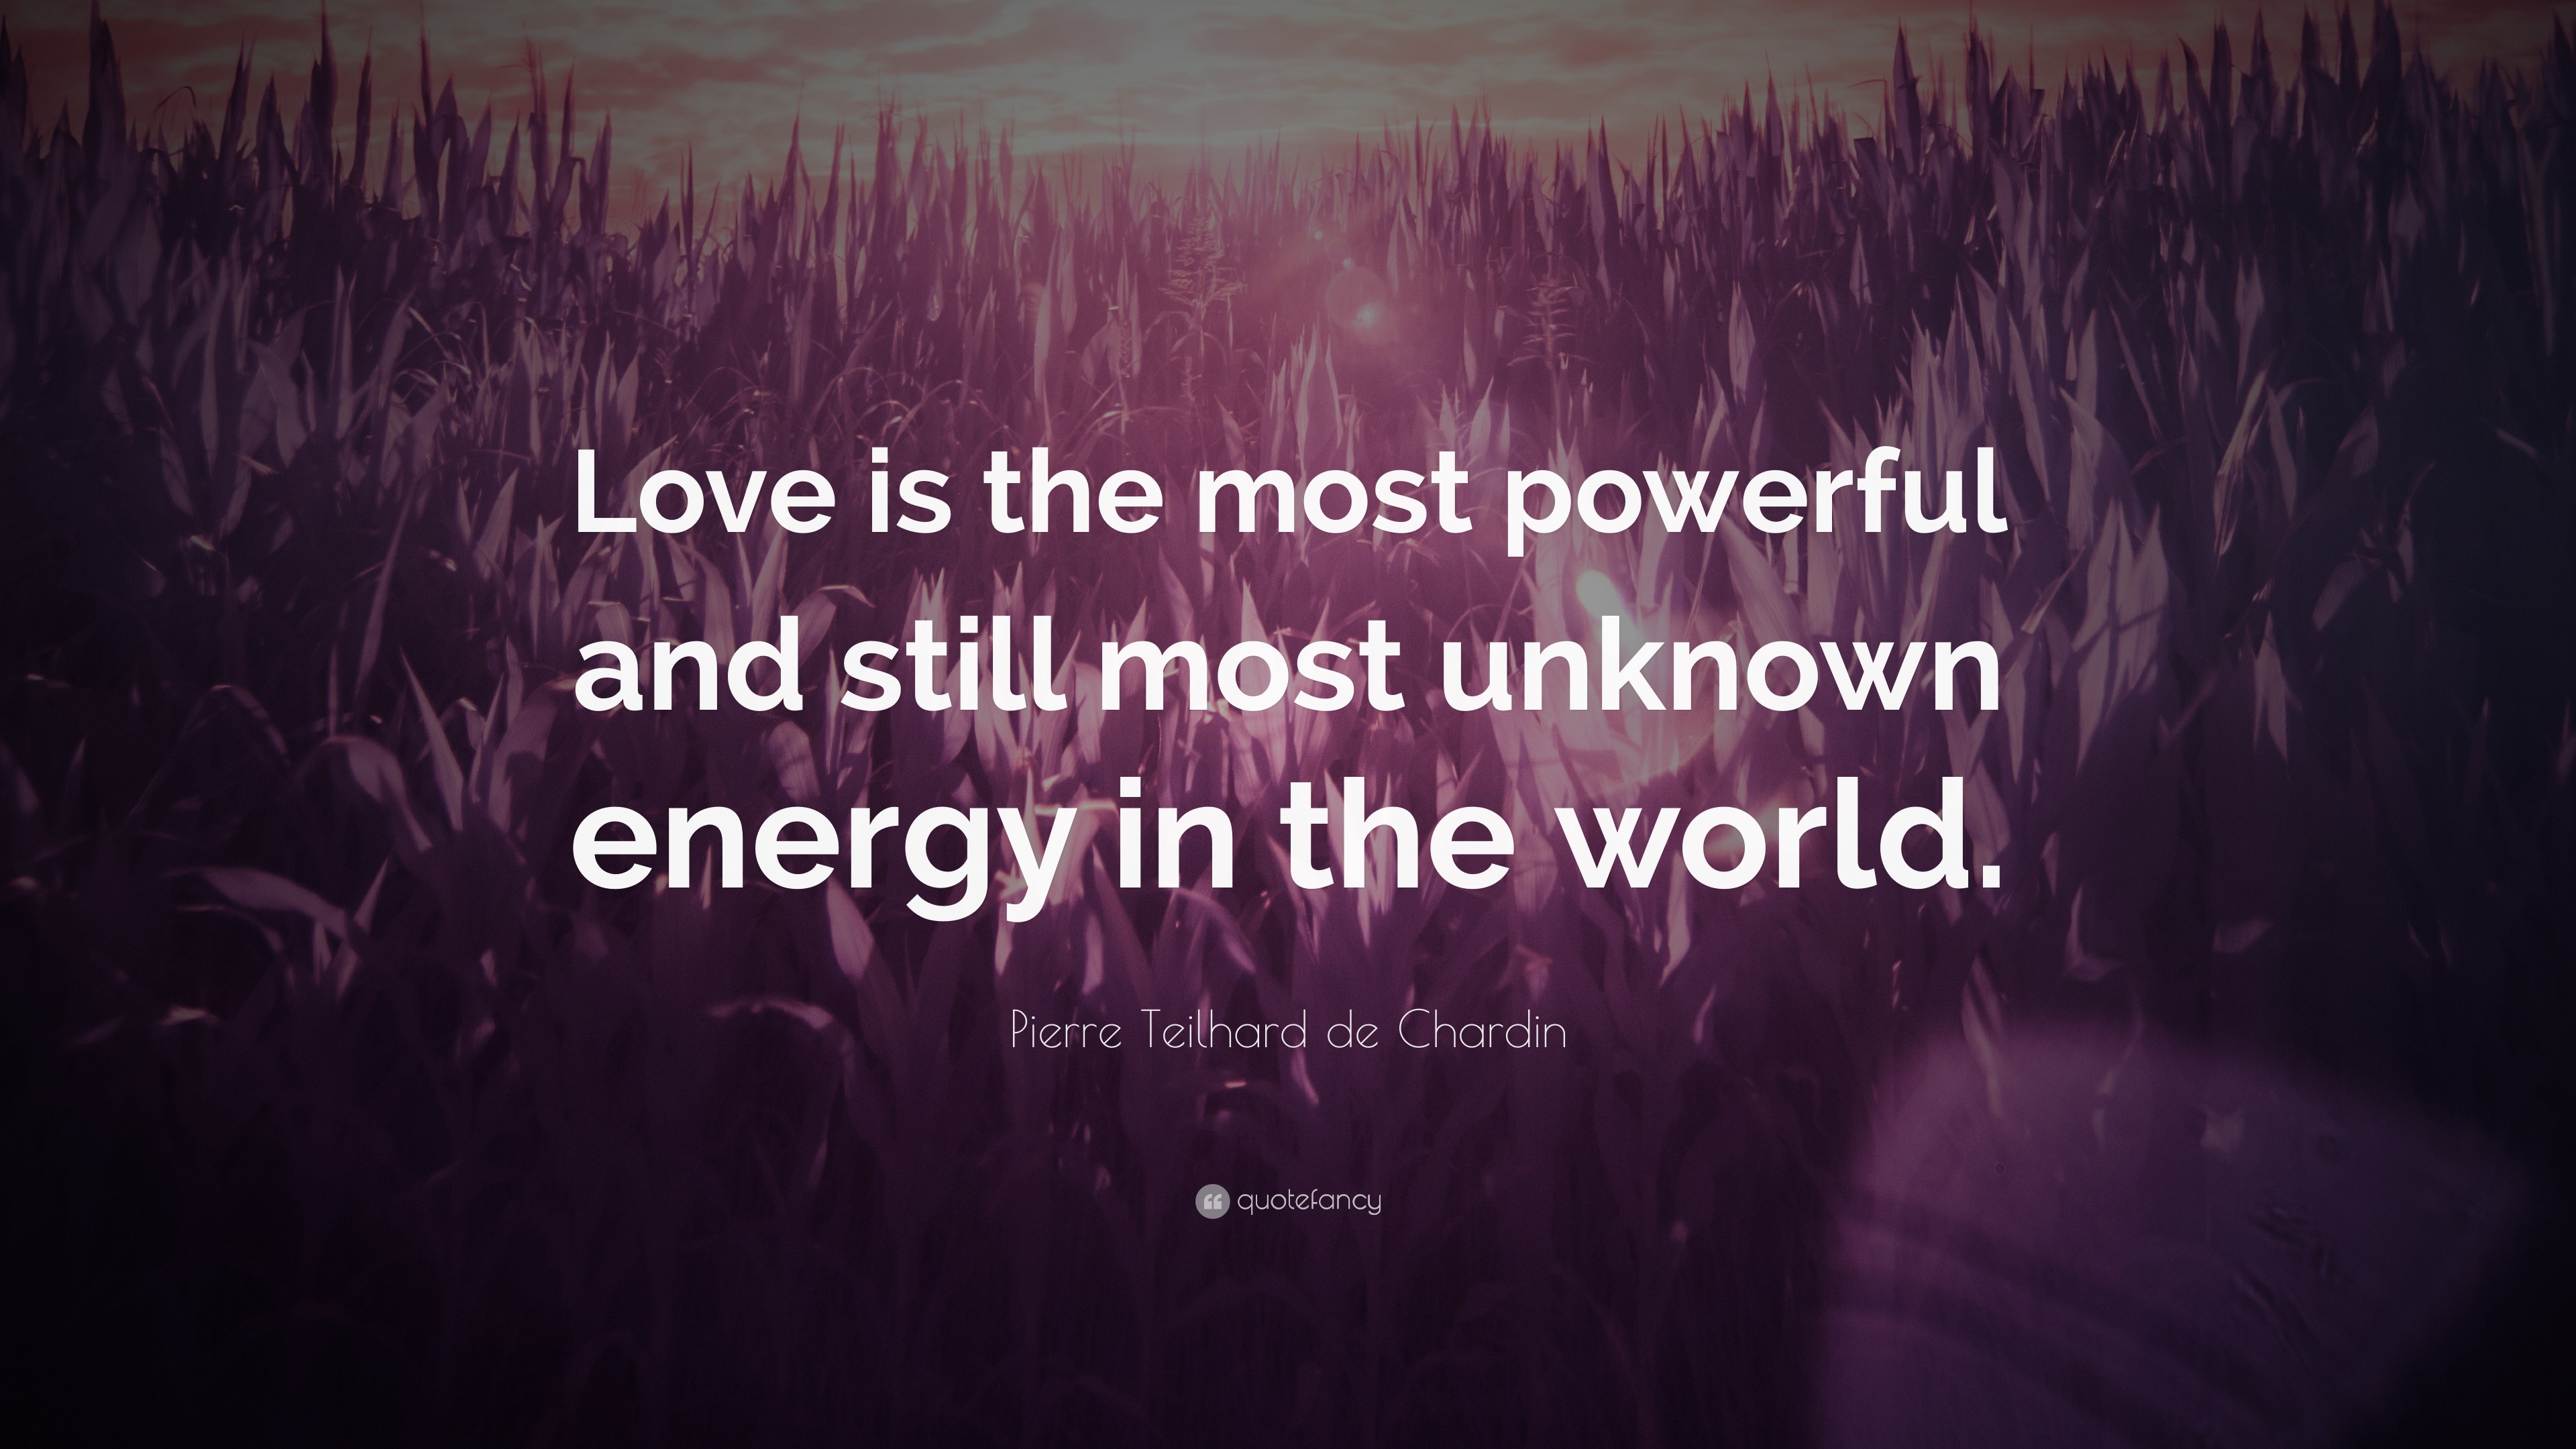 Pierre Teilhard de Chardin Quote: “Love is the most powerful and still